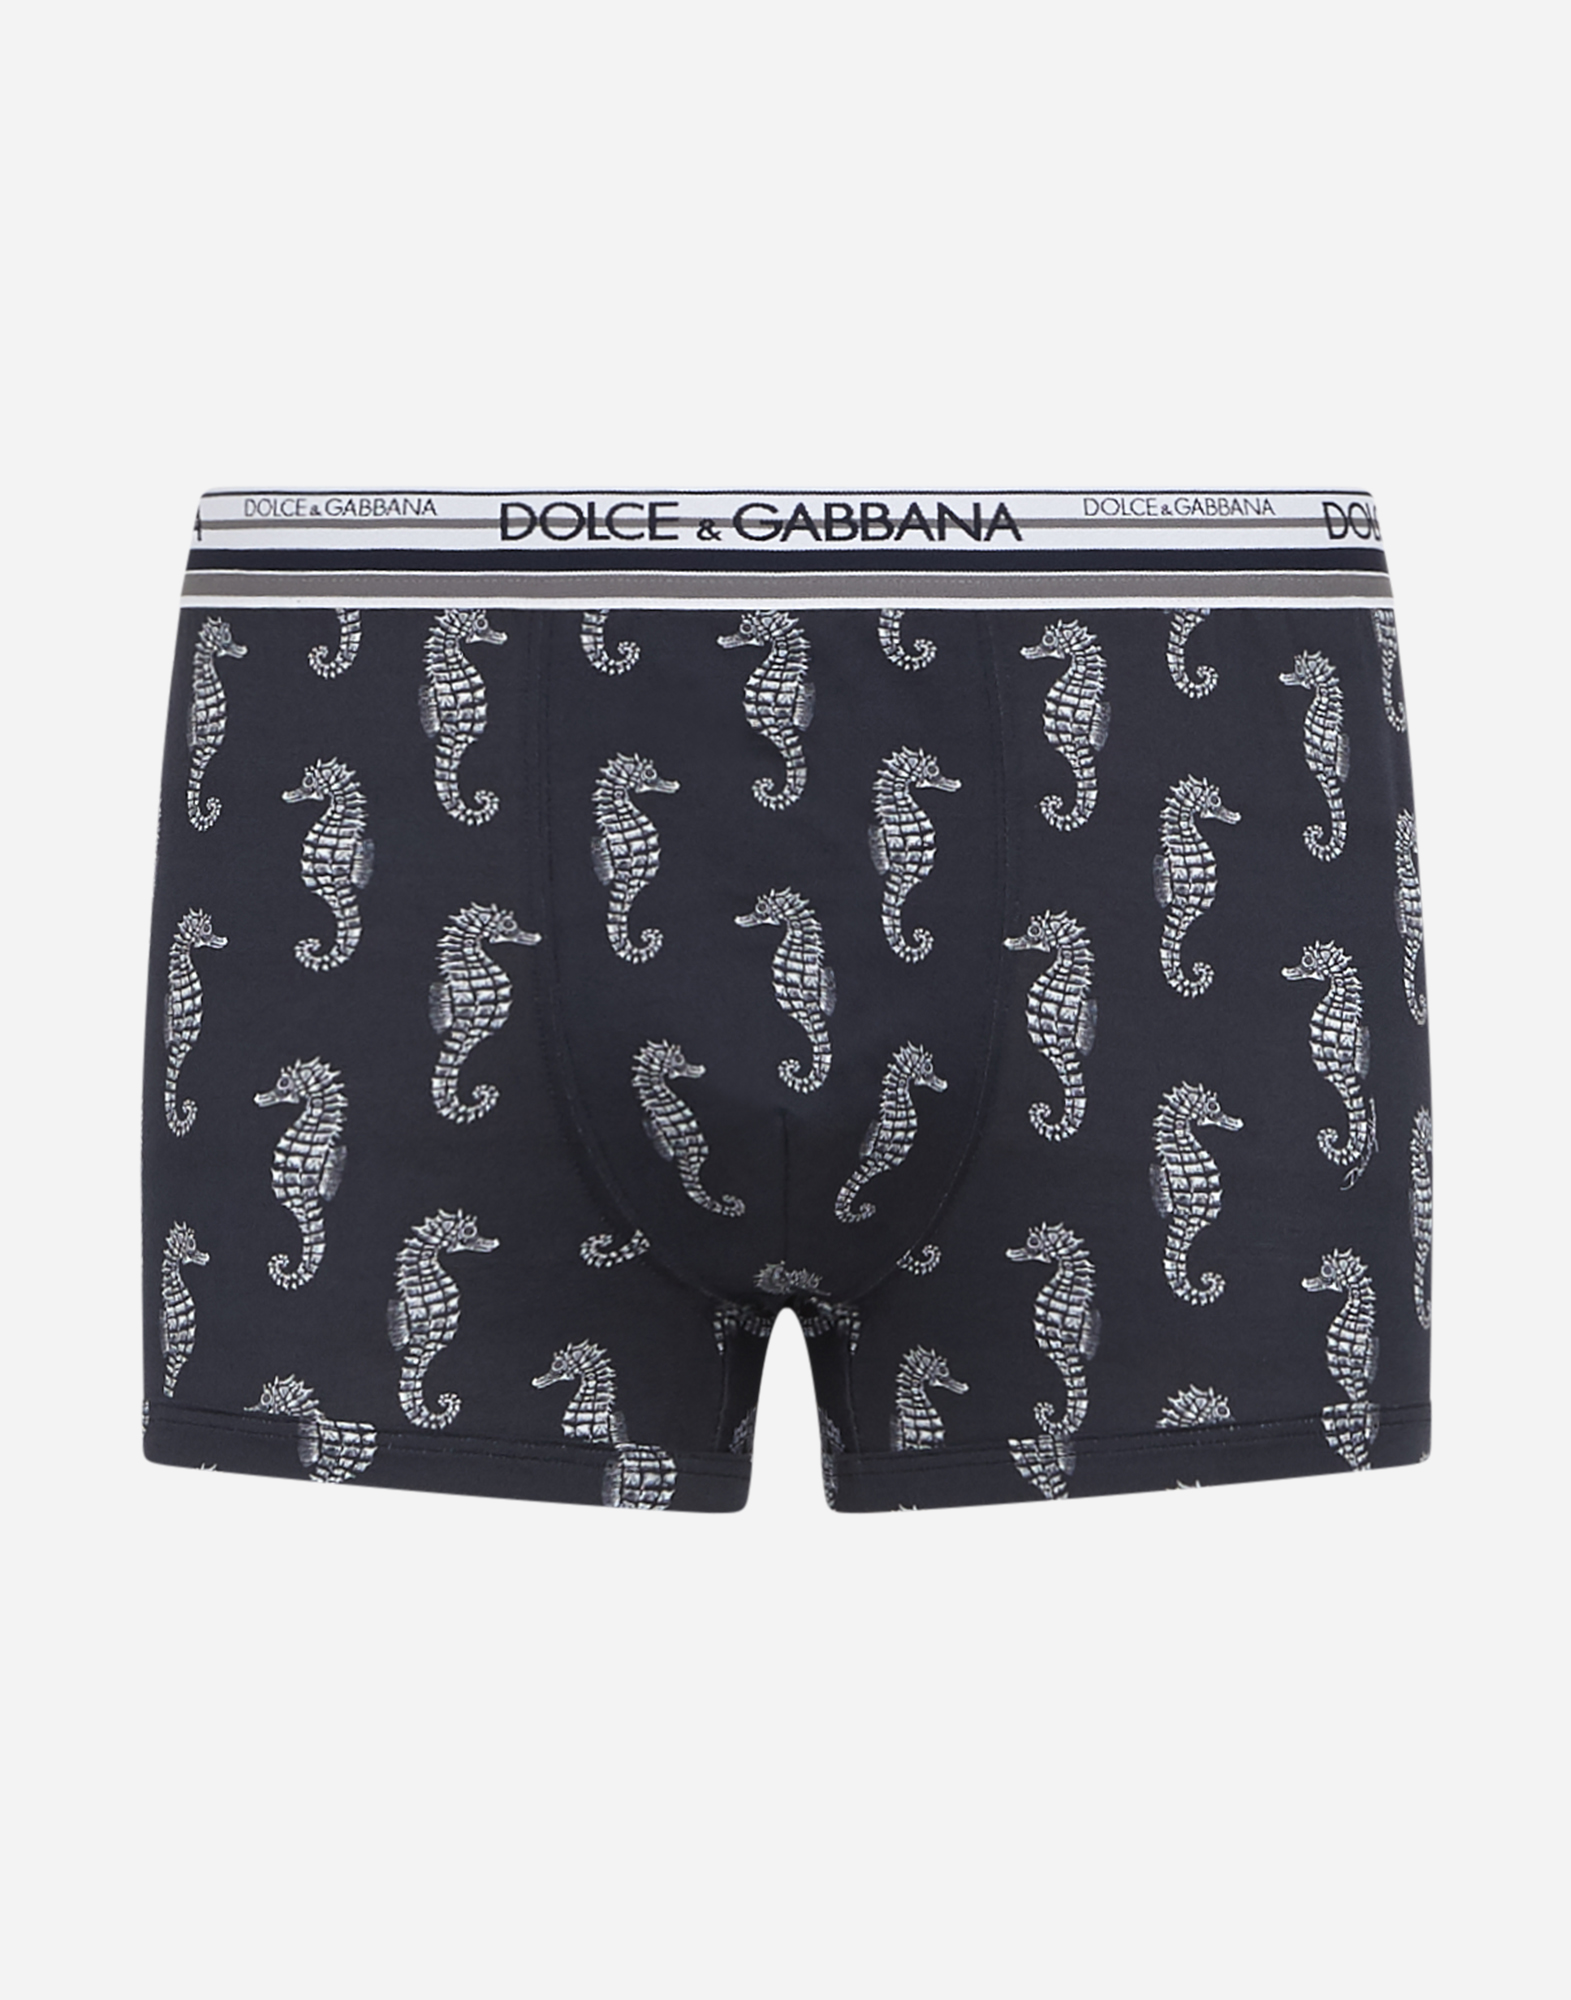 DOLCE & GABBANA COTTON BOXERS WITH SEAHORSE PRINT